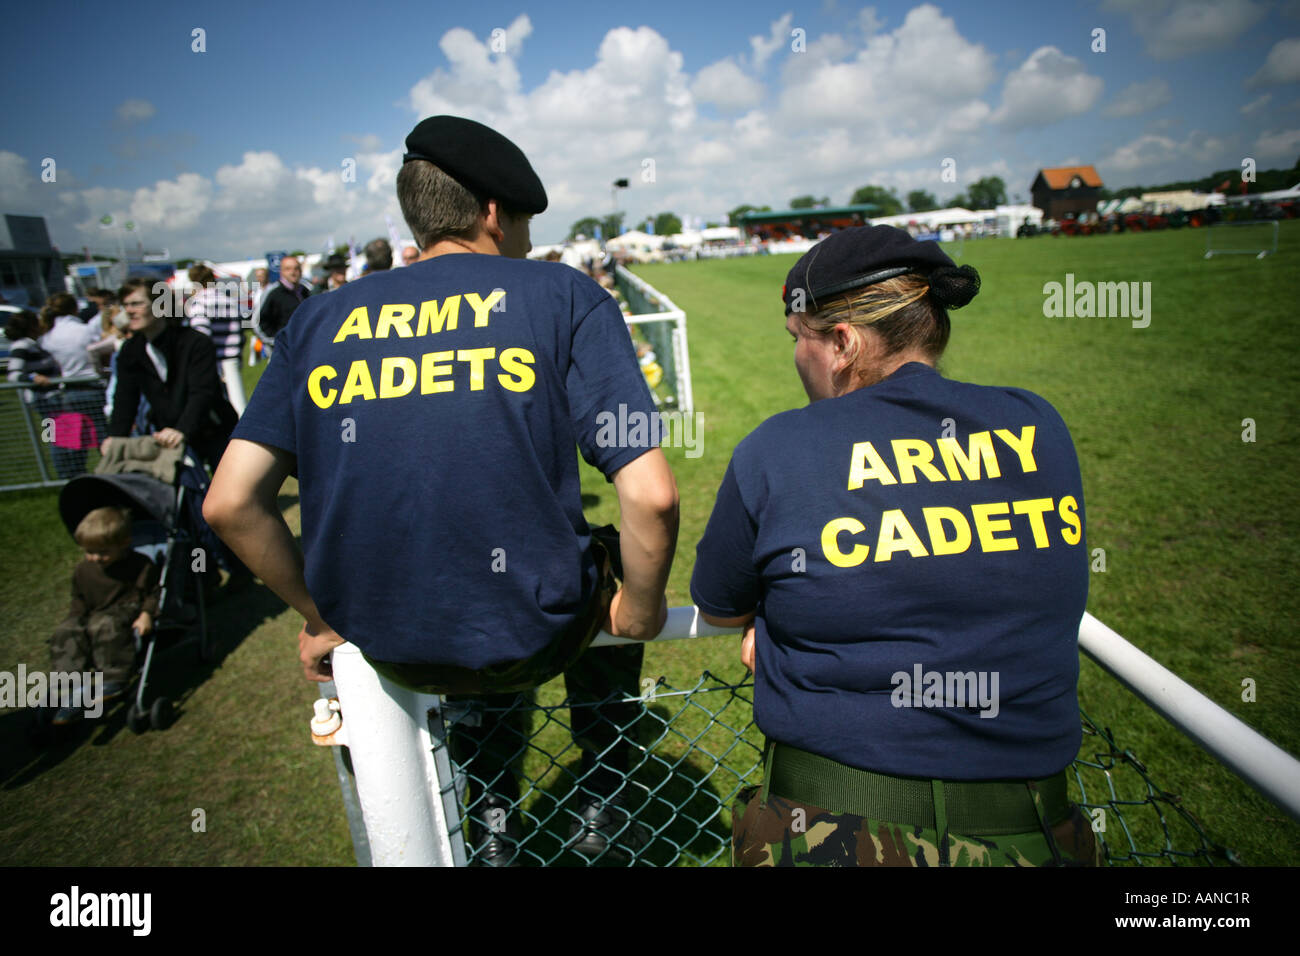 Army cadets in charge of the opening and closing of access gates at the Suffolk agricultural Show, England, UK Stock Photo